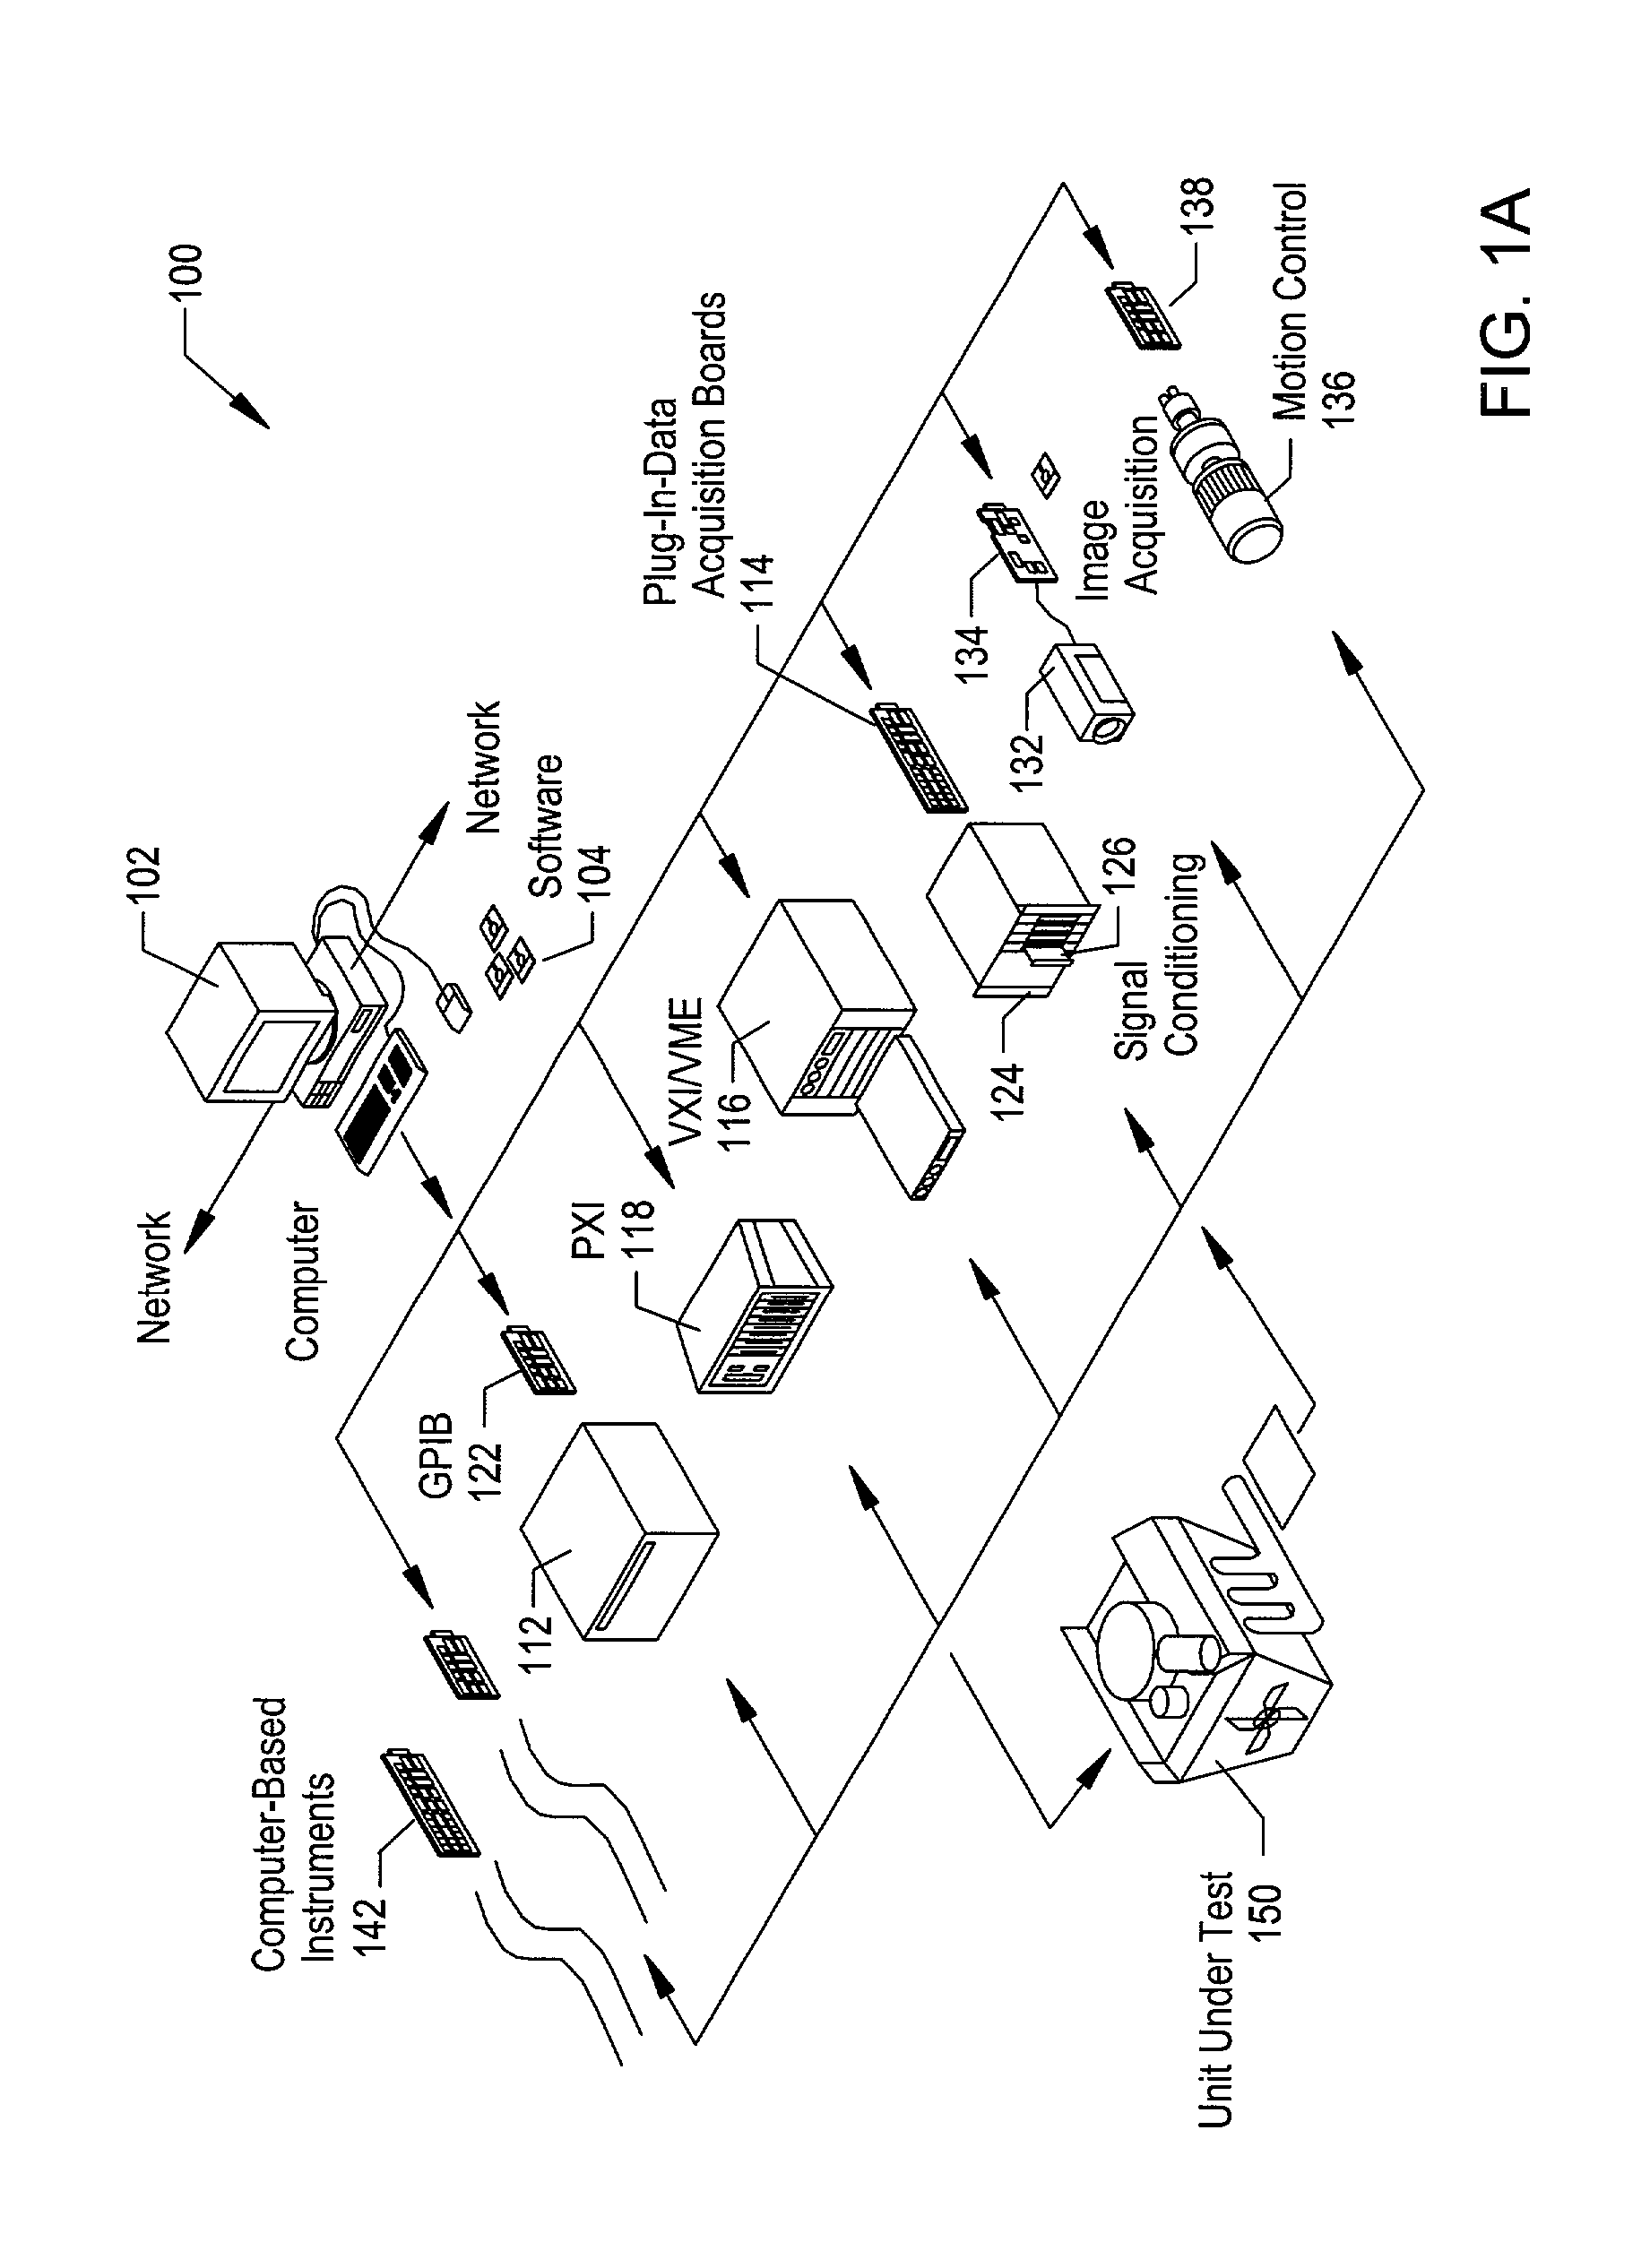 Graphical user interface including palette windows with an improved search function